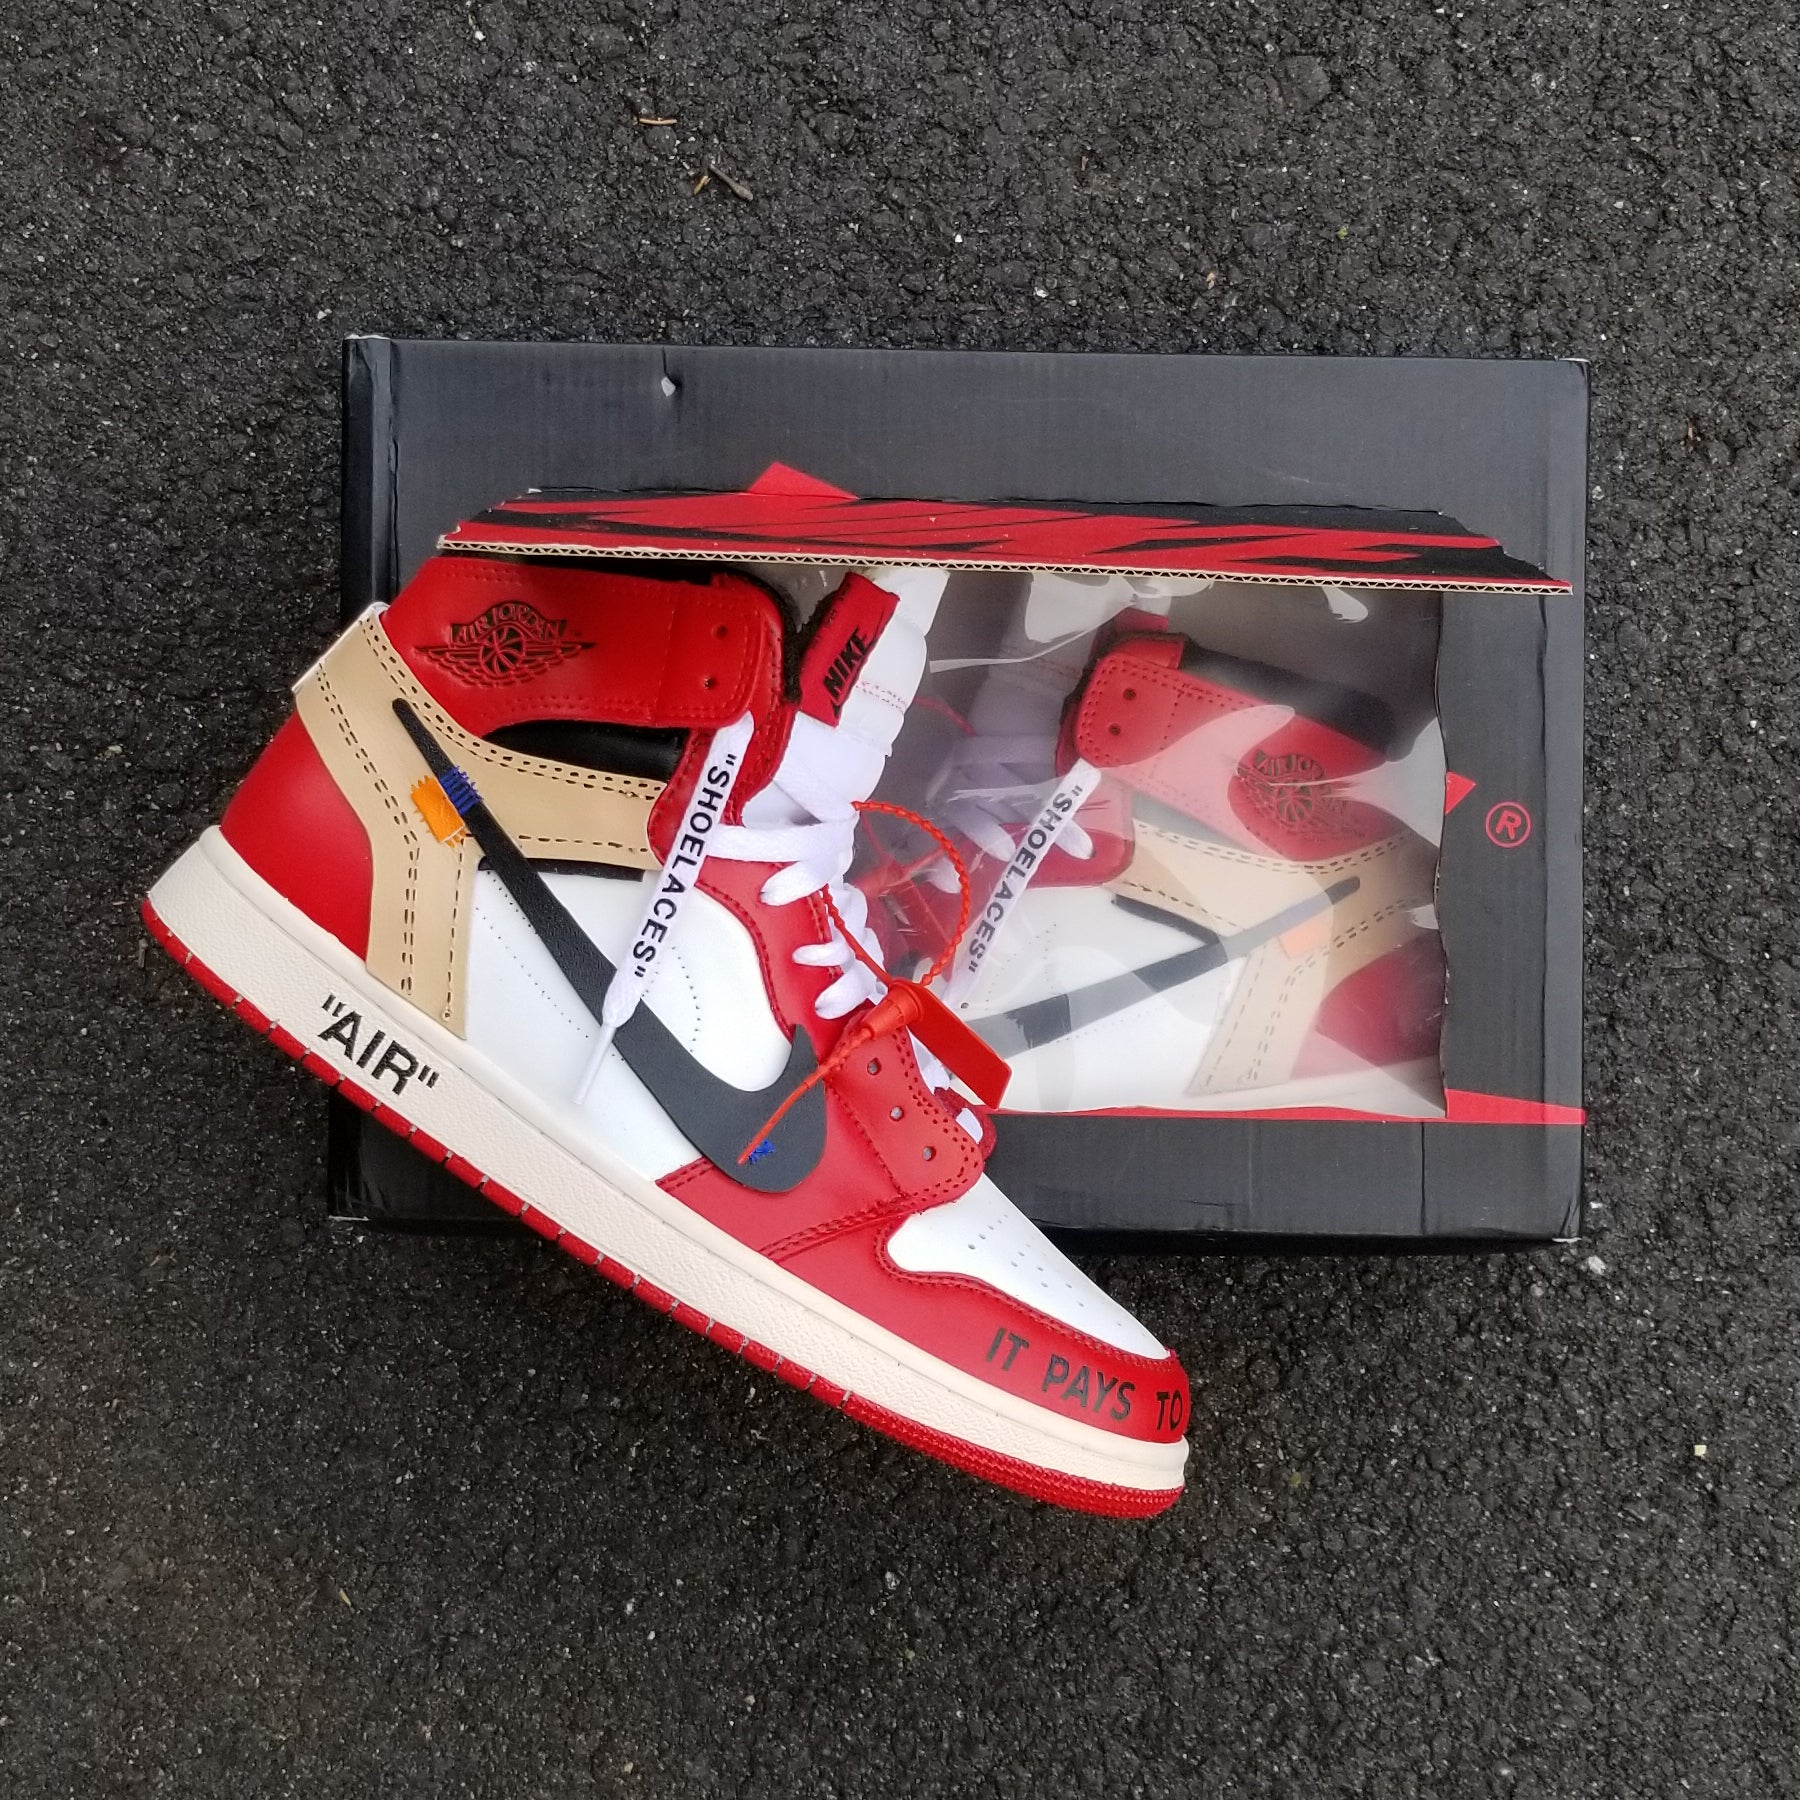 Custom Off-White LV Air Jordan 1 Review with the special box 